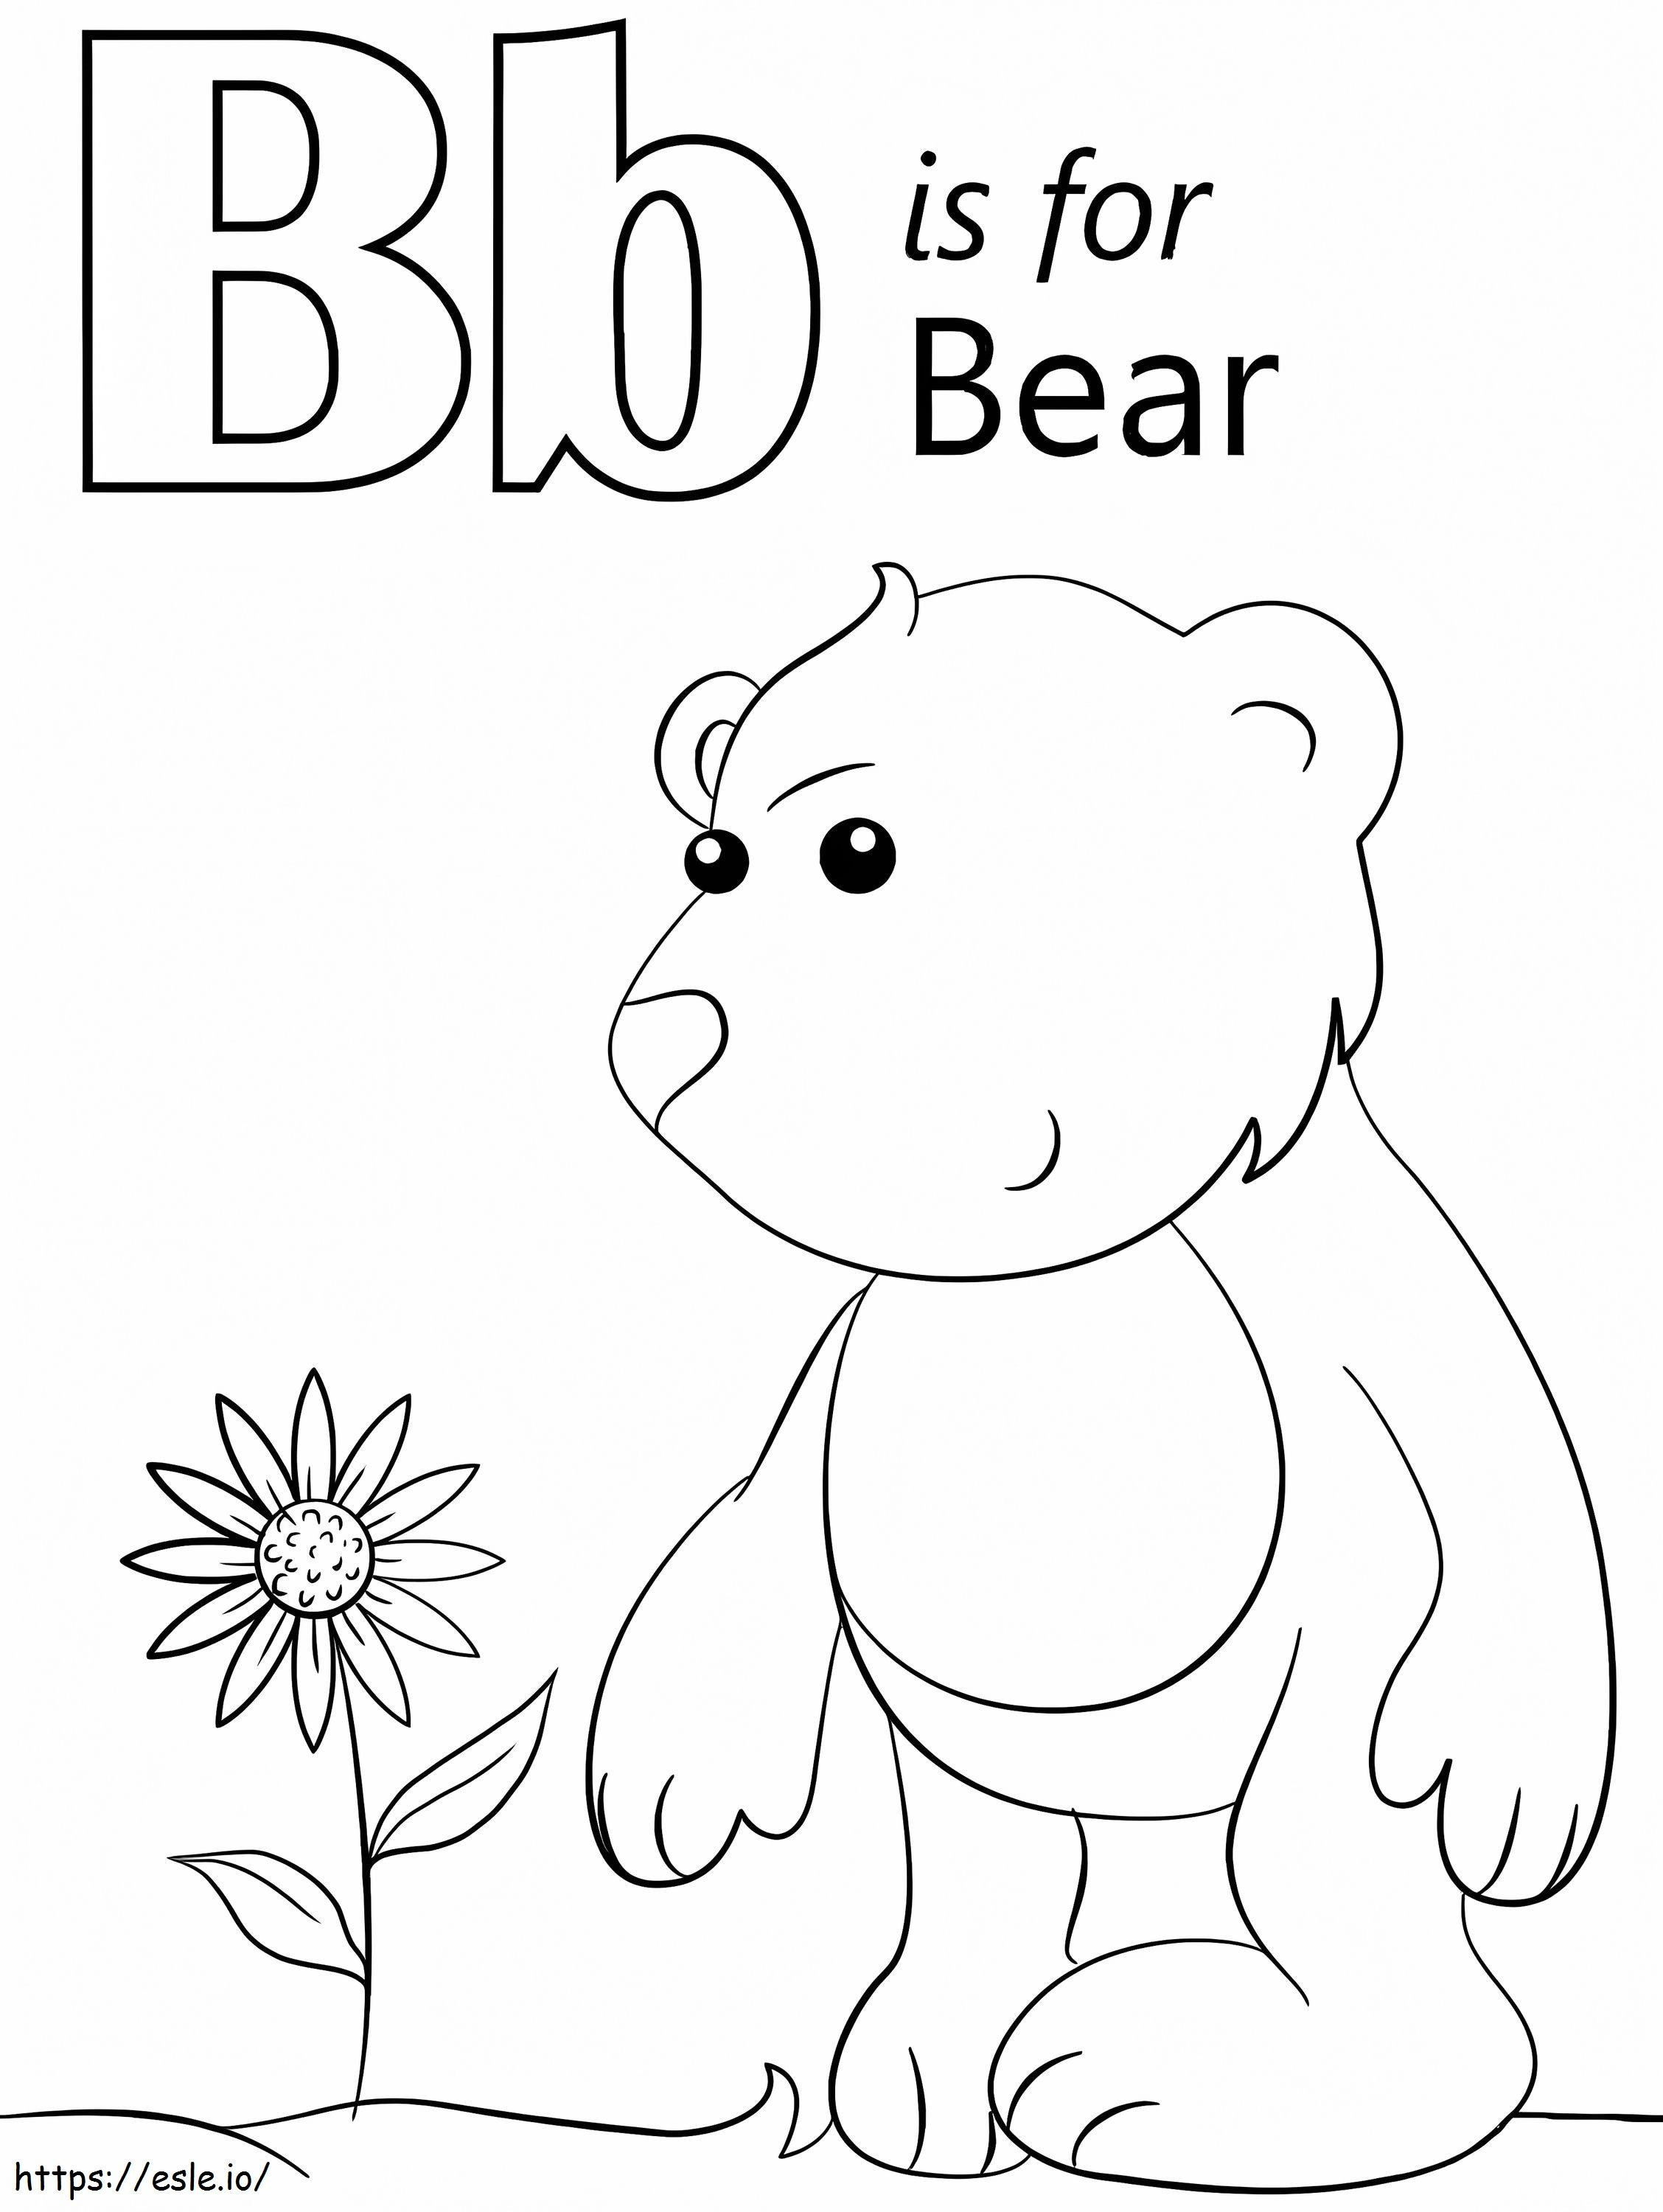 Bear Letter B coloring page